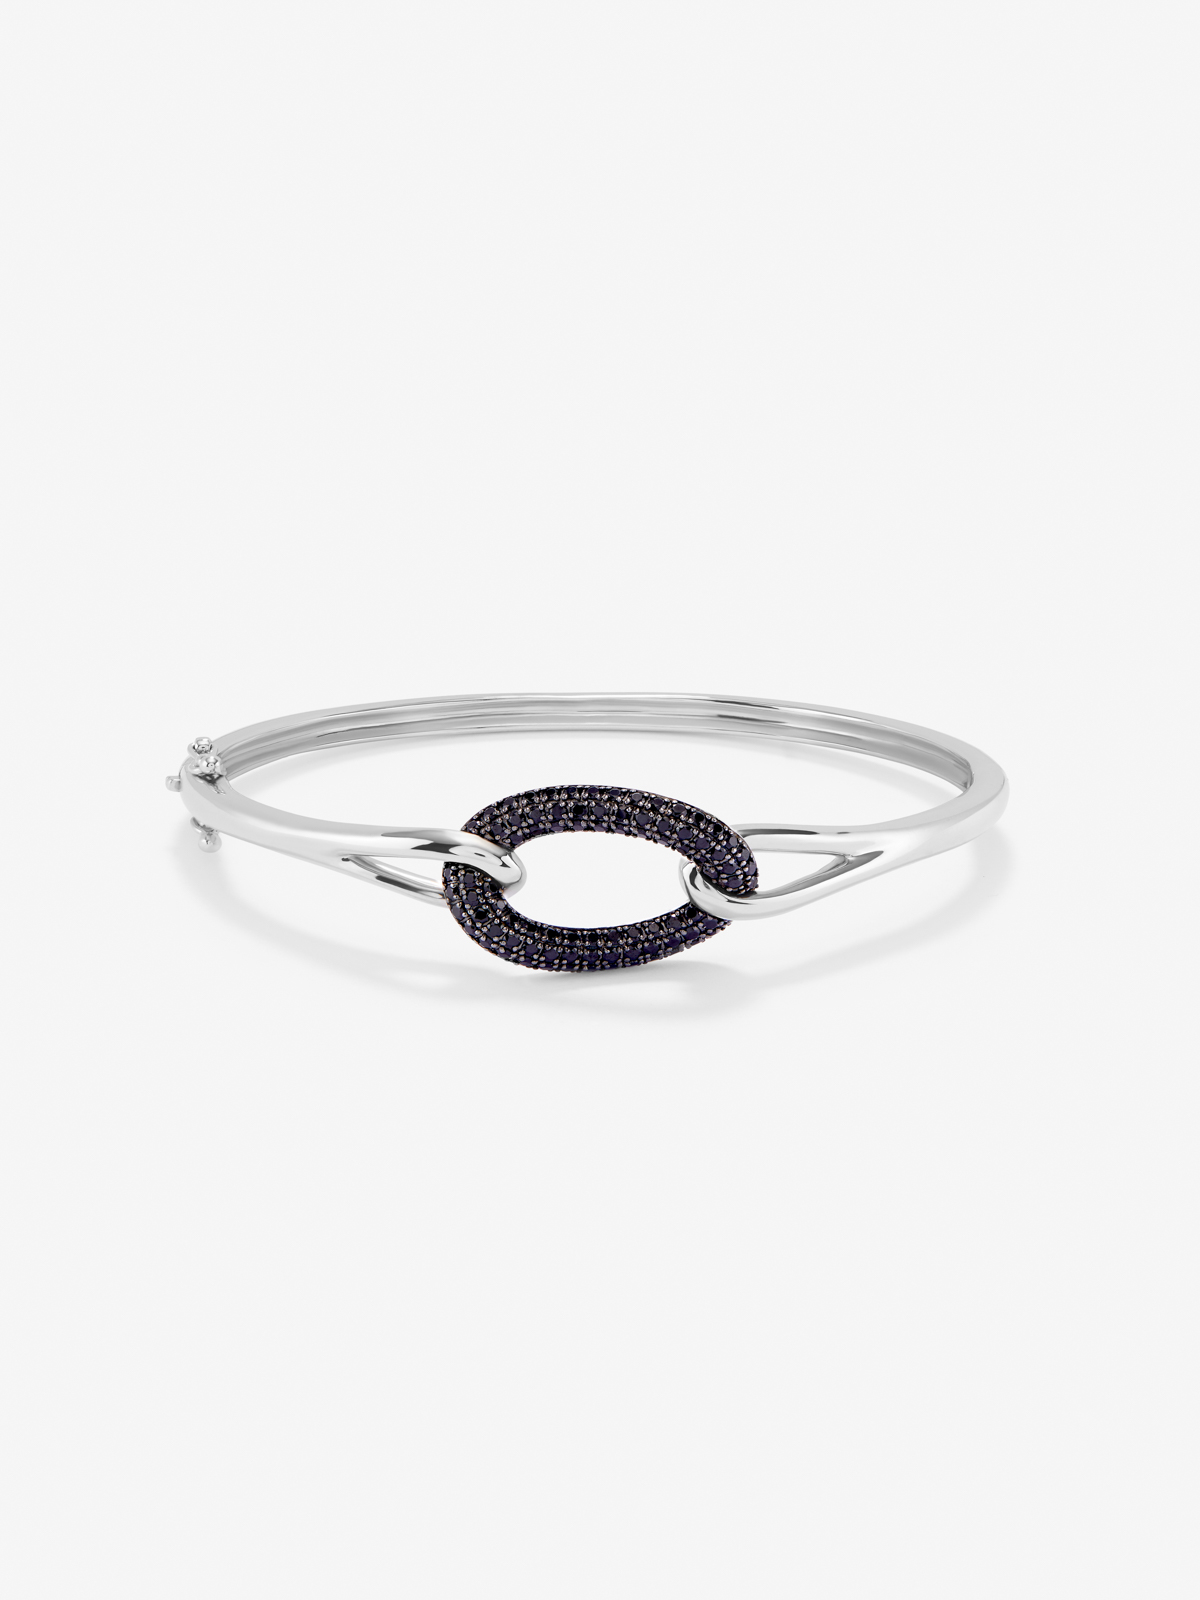 Rigid bracelet with 925 silver knot with spinels